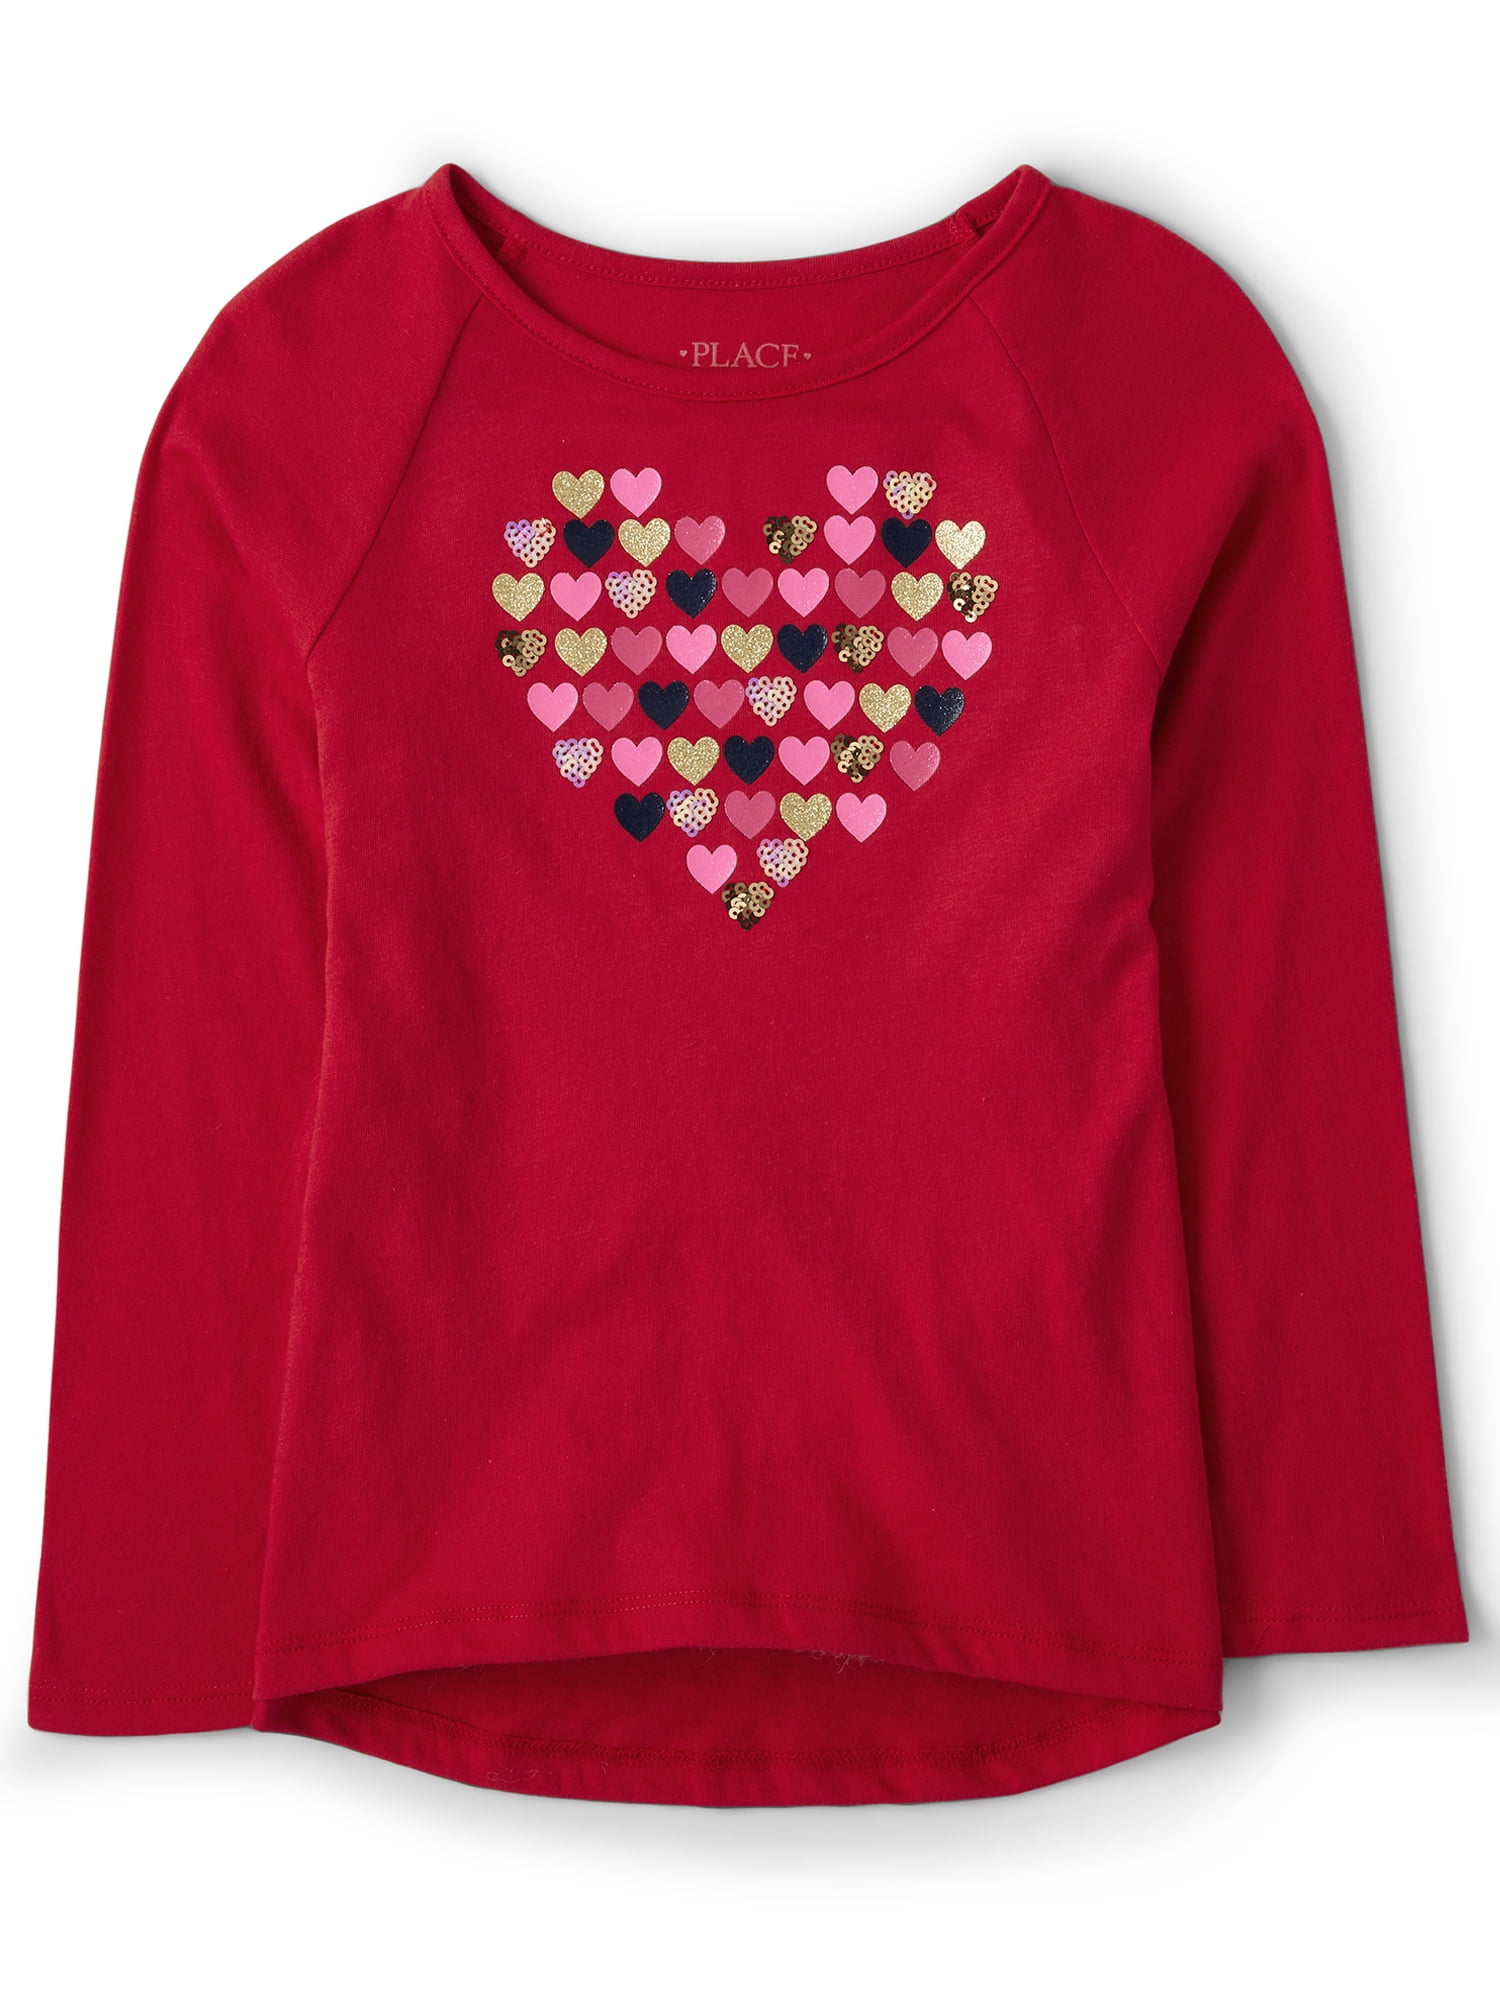 The Children's Place Girls Long Sleeve Valentine's Day Graphic Top